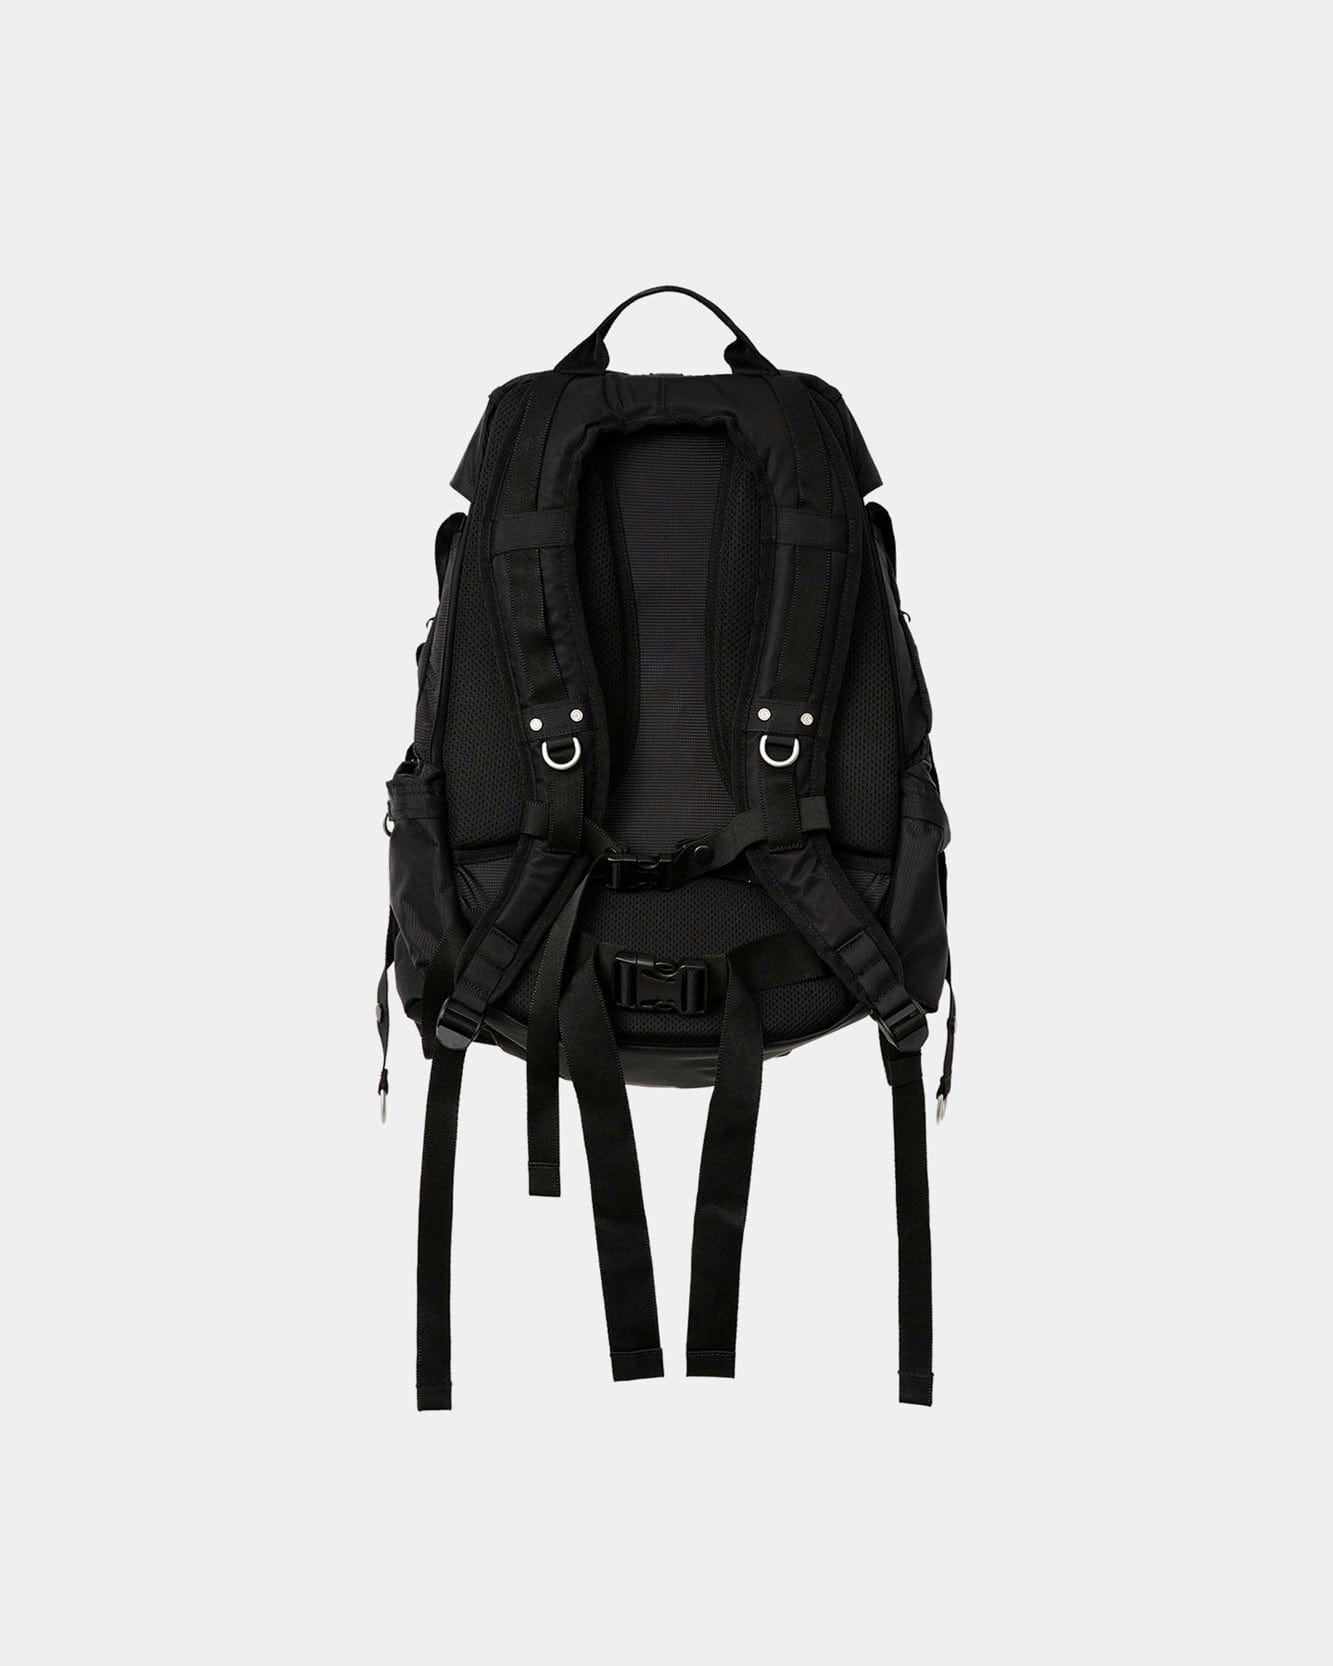 Andersson Bell FREE UNISEX TECHNICAL SMALL BERLIN BACKPACK aaa425u(BLACK)